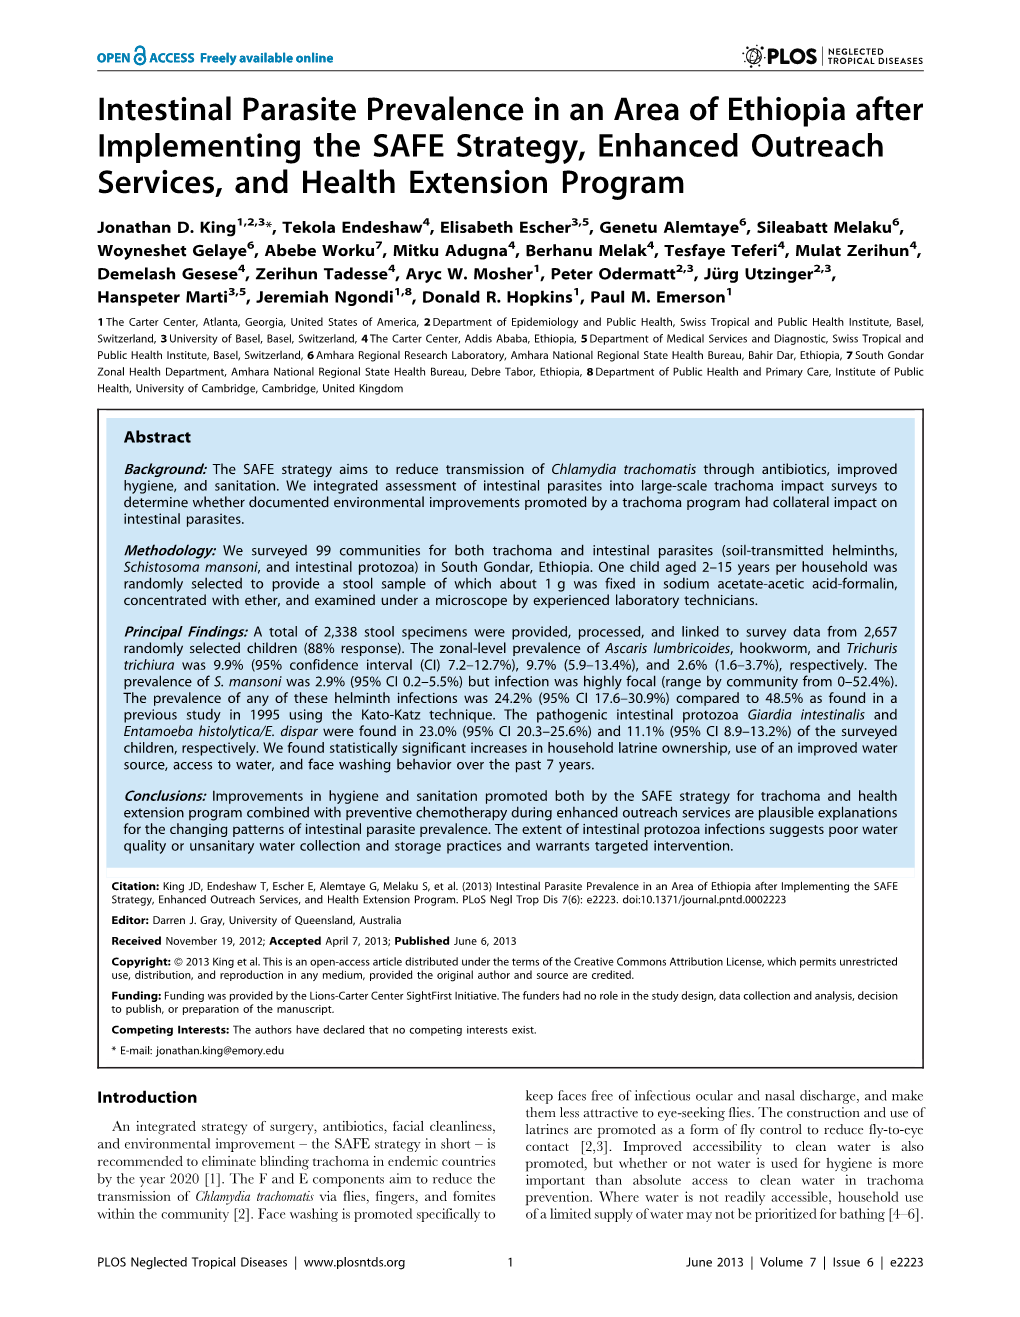 Intestinal Parasite Prevalence in an Area of Ethiopia After Implementing the SAFE Strategy, Enhanced Outreach Services, and Health Extension Program